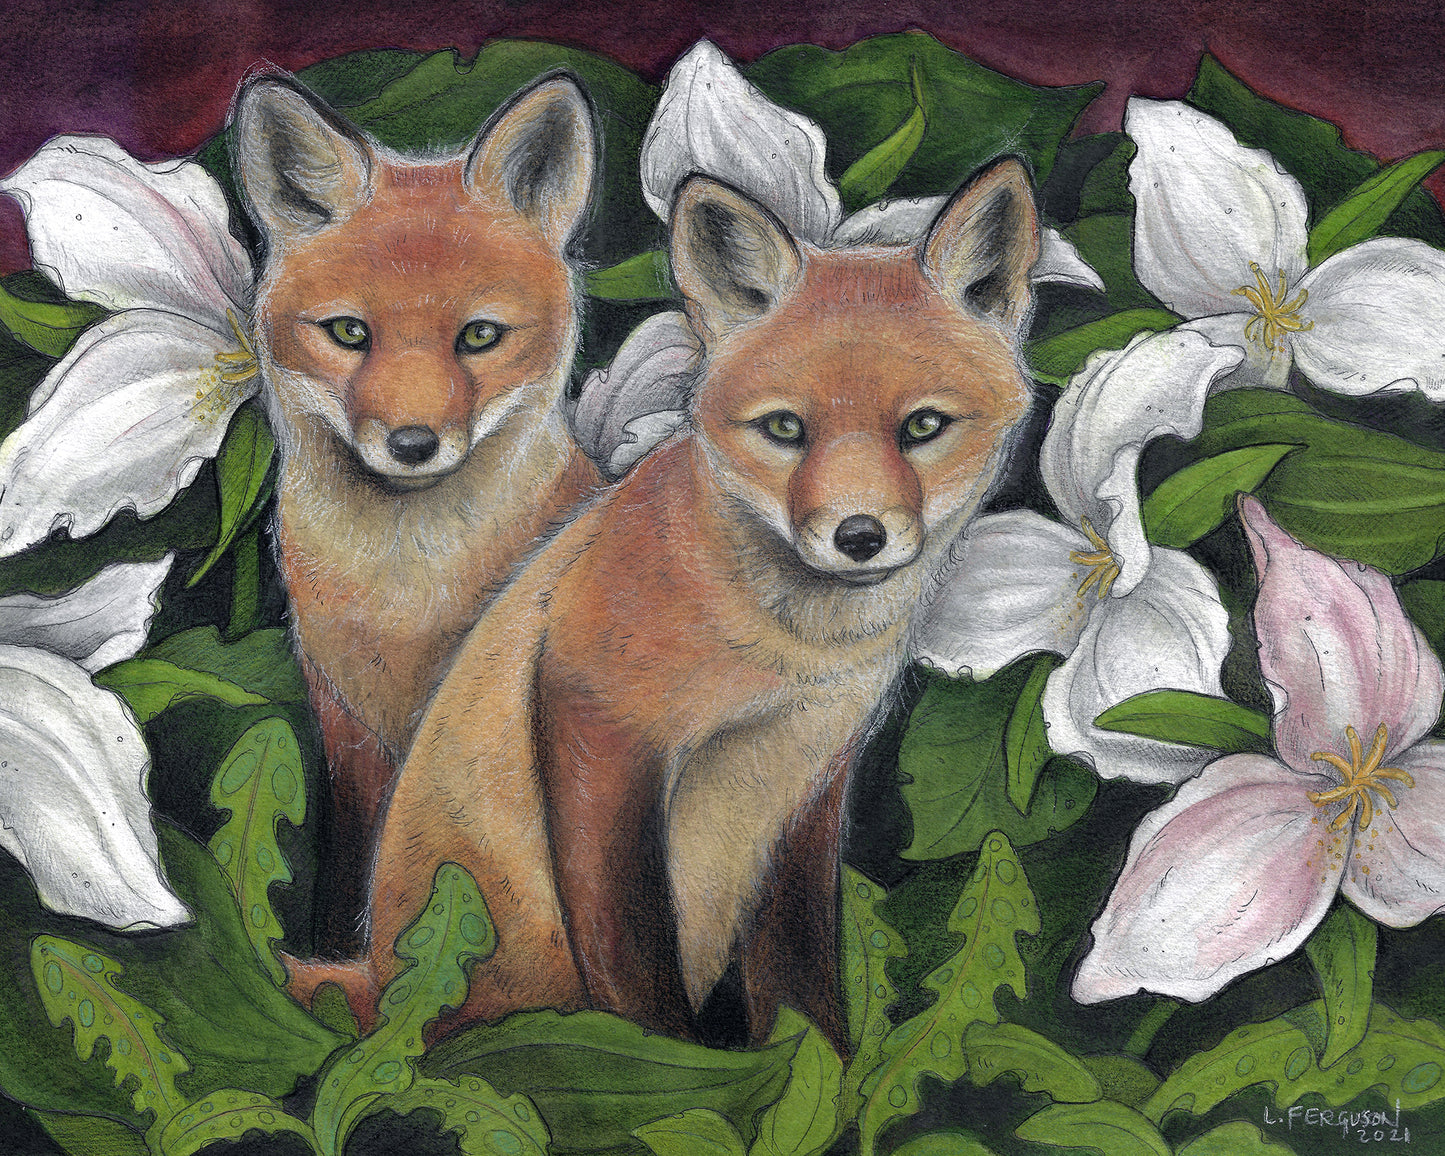 An illustration print showing two small fox kits in a garden of Giant trilliums